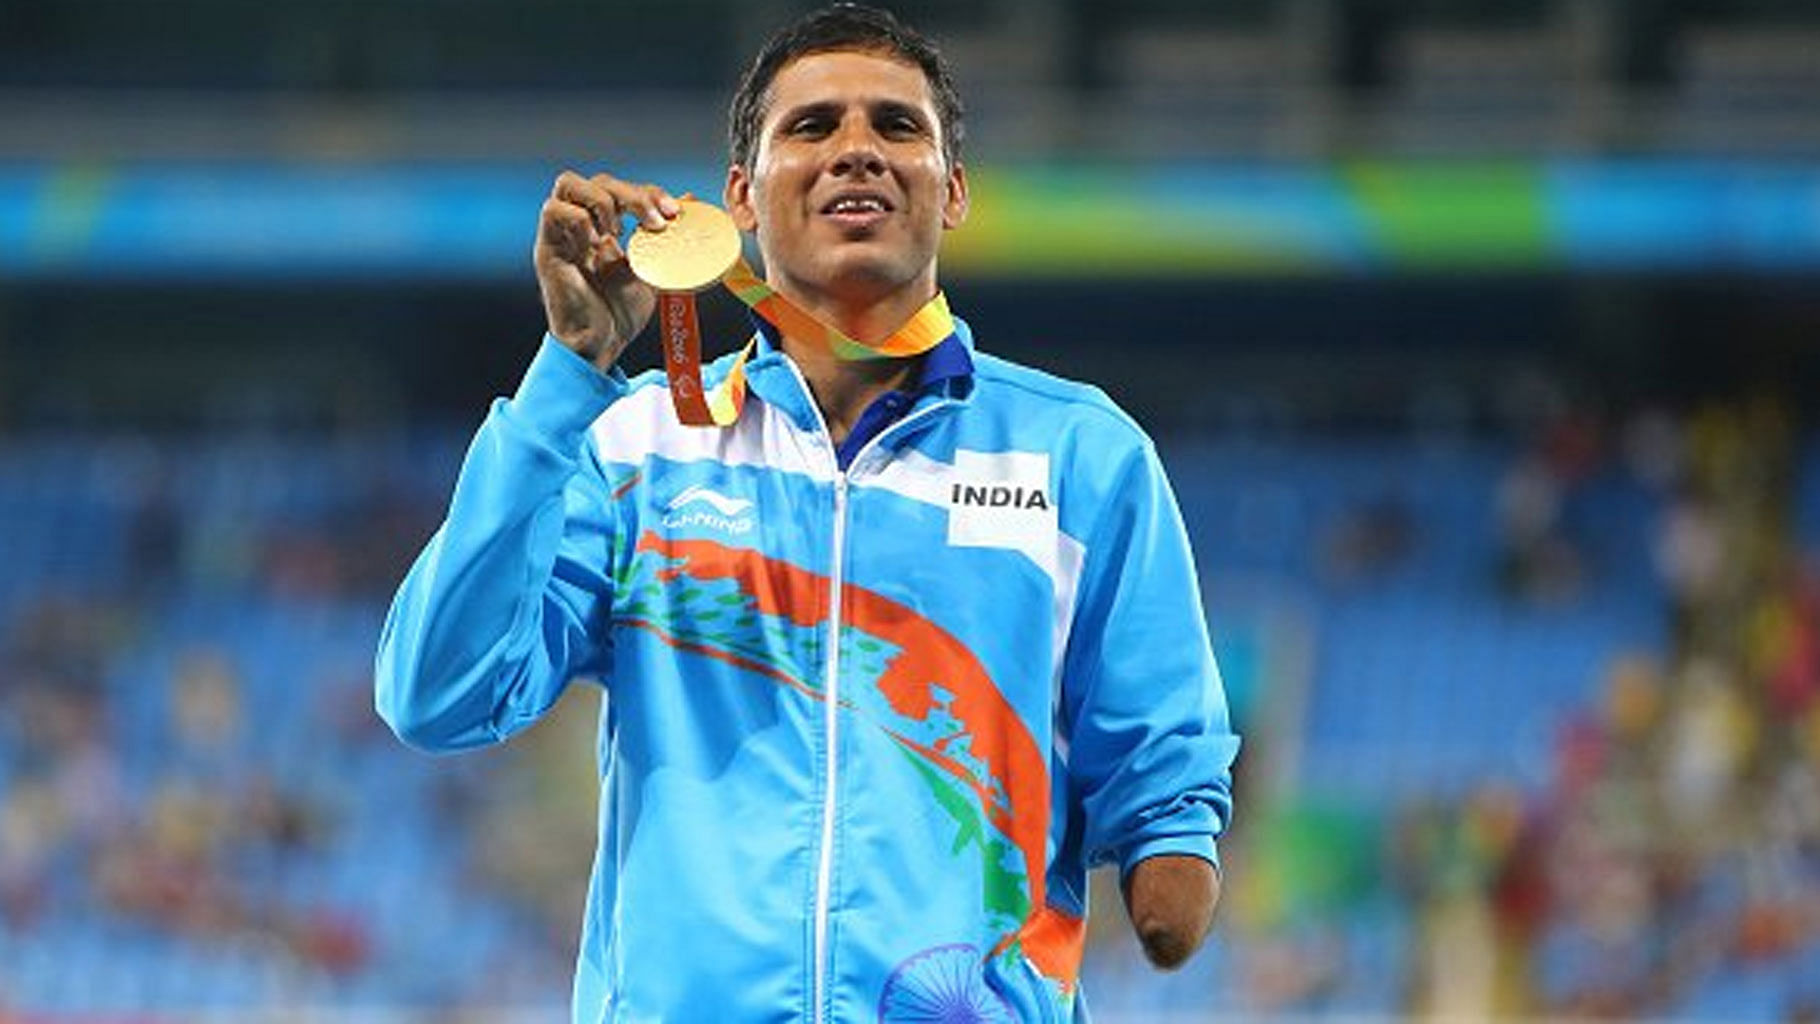 <div class="paragraphs"><p>India’s Javelin thrower Devendra Jhajharia holds up his gold medal at the Rio Paralympics.  </p></div>